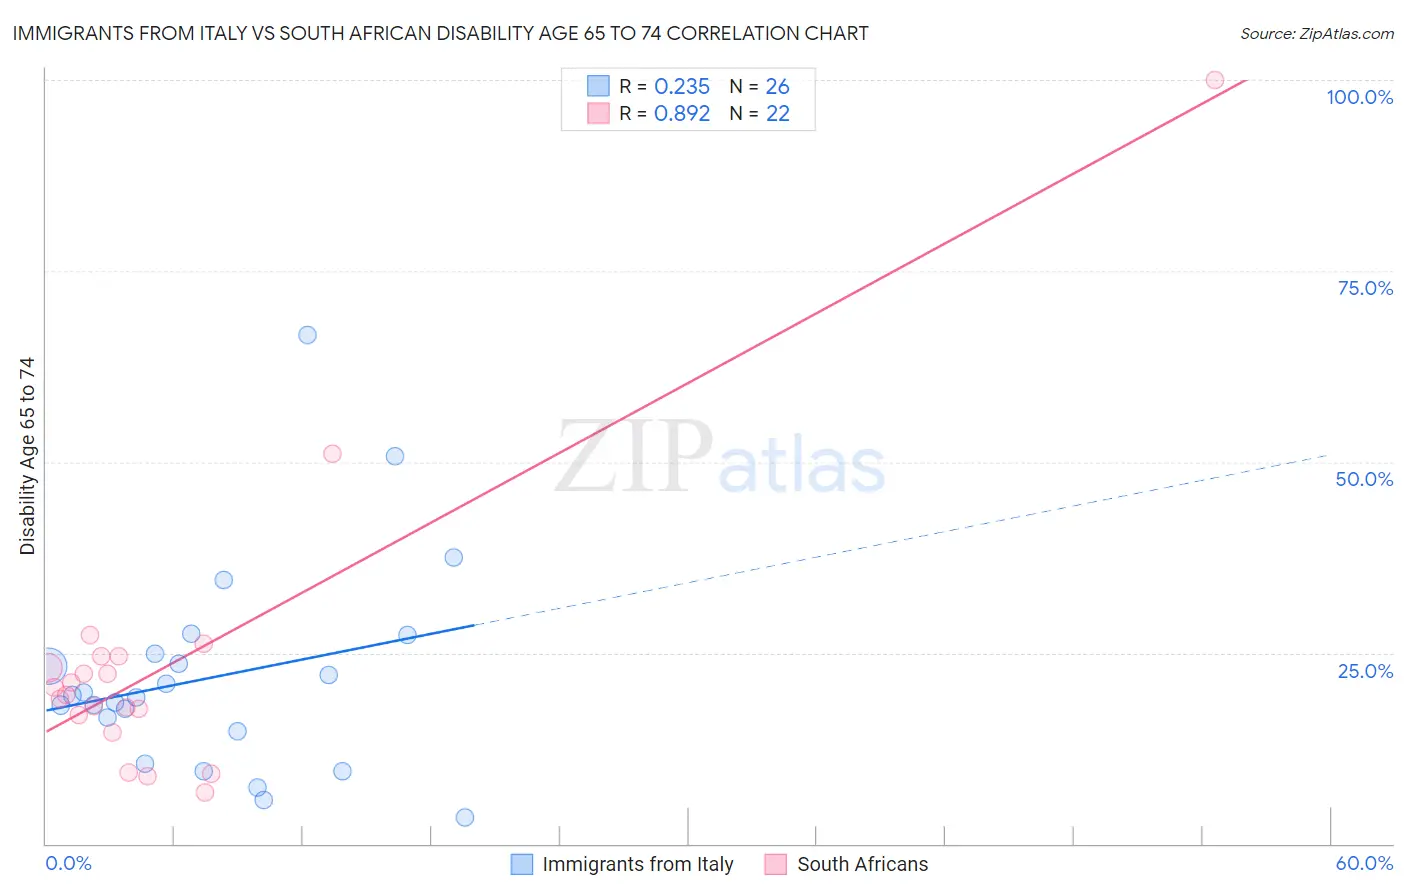 Immigrants from Italy vs South African Disability Age 65 to 74